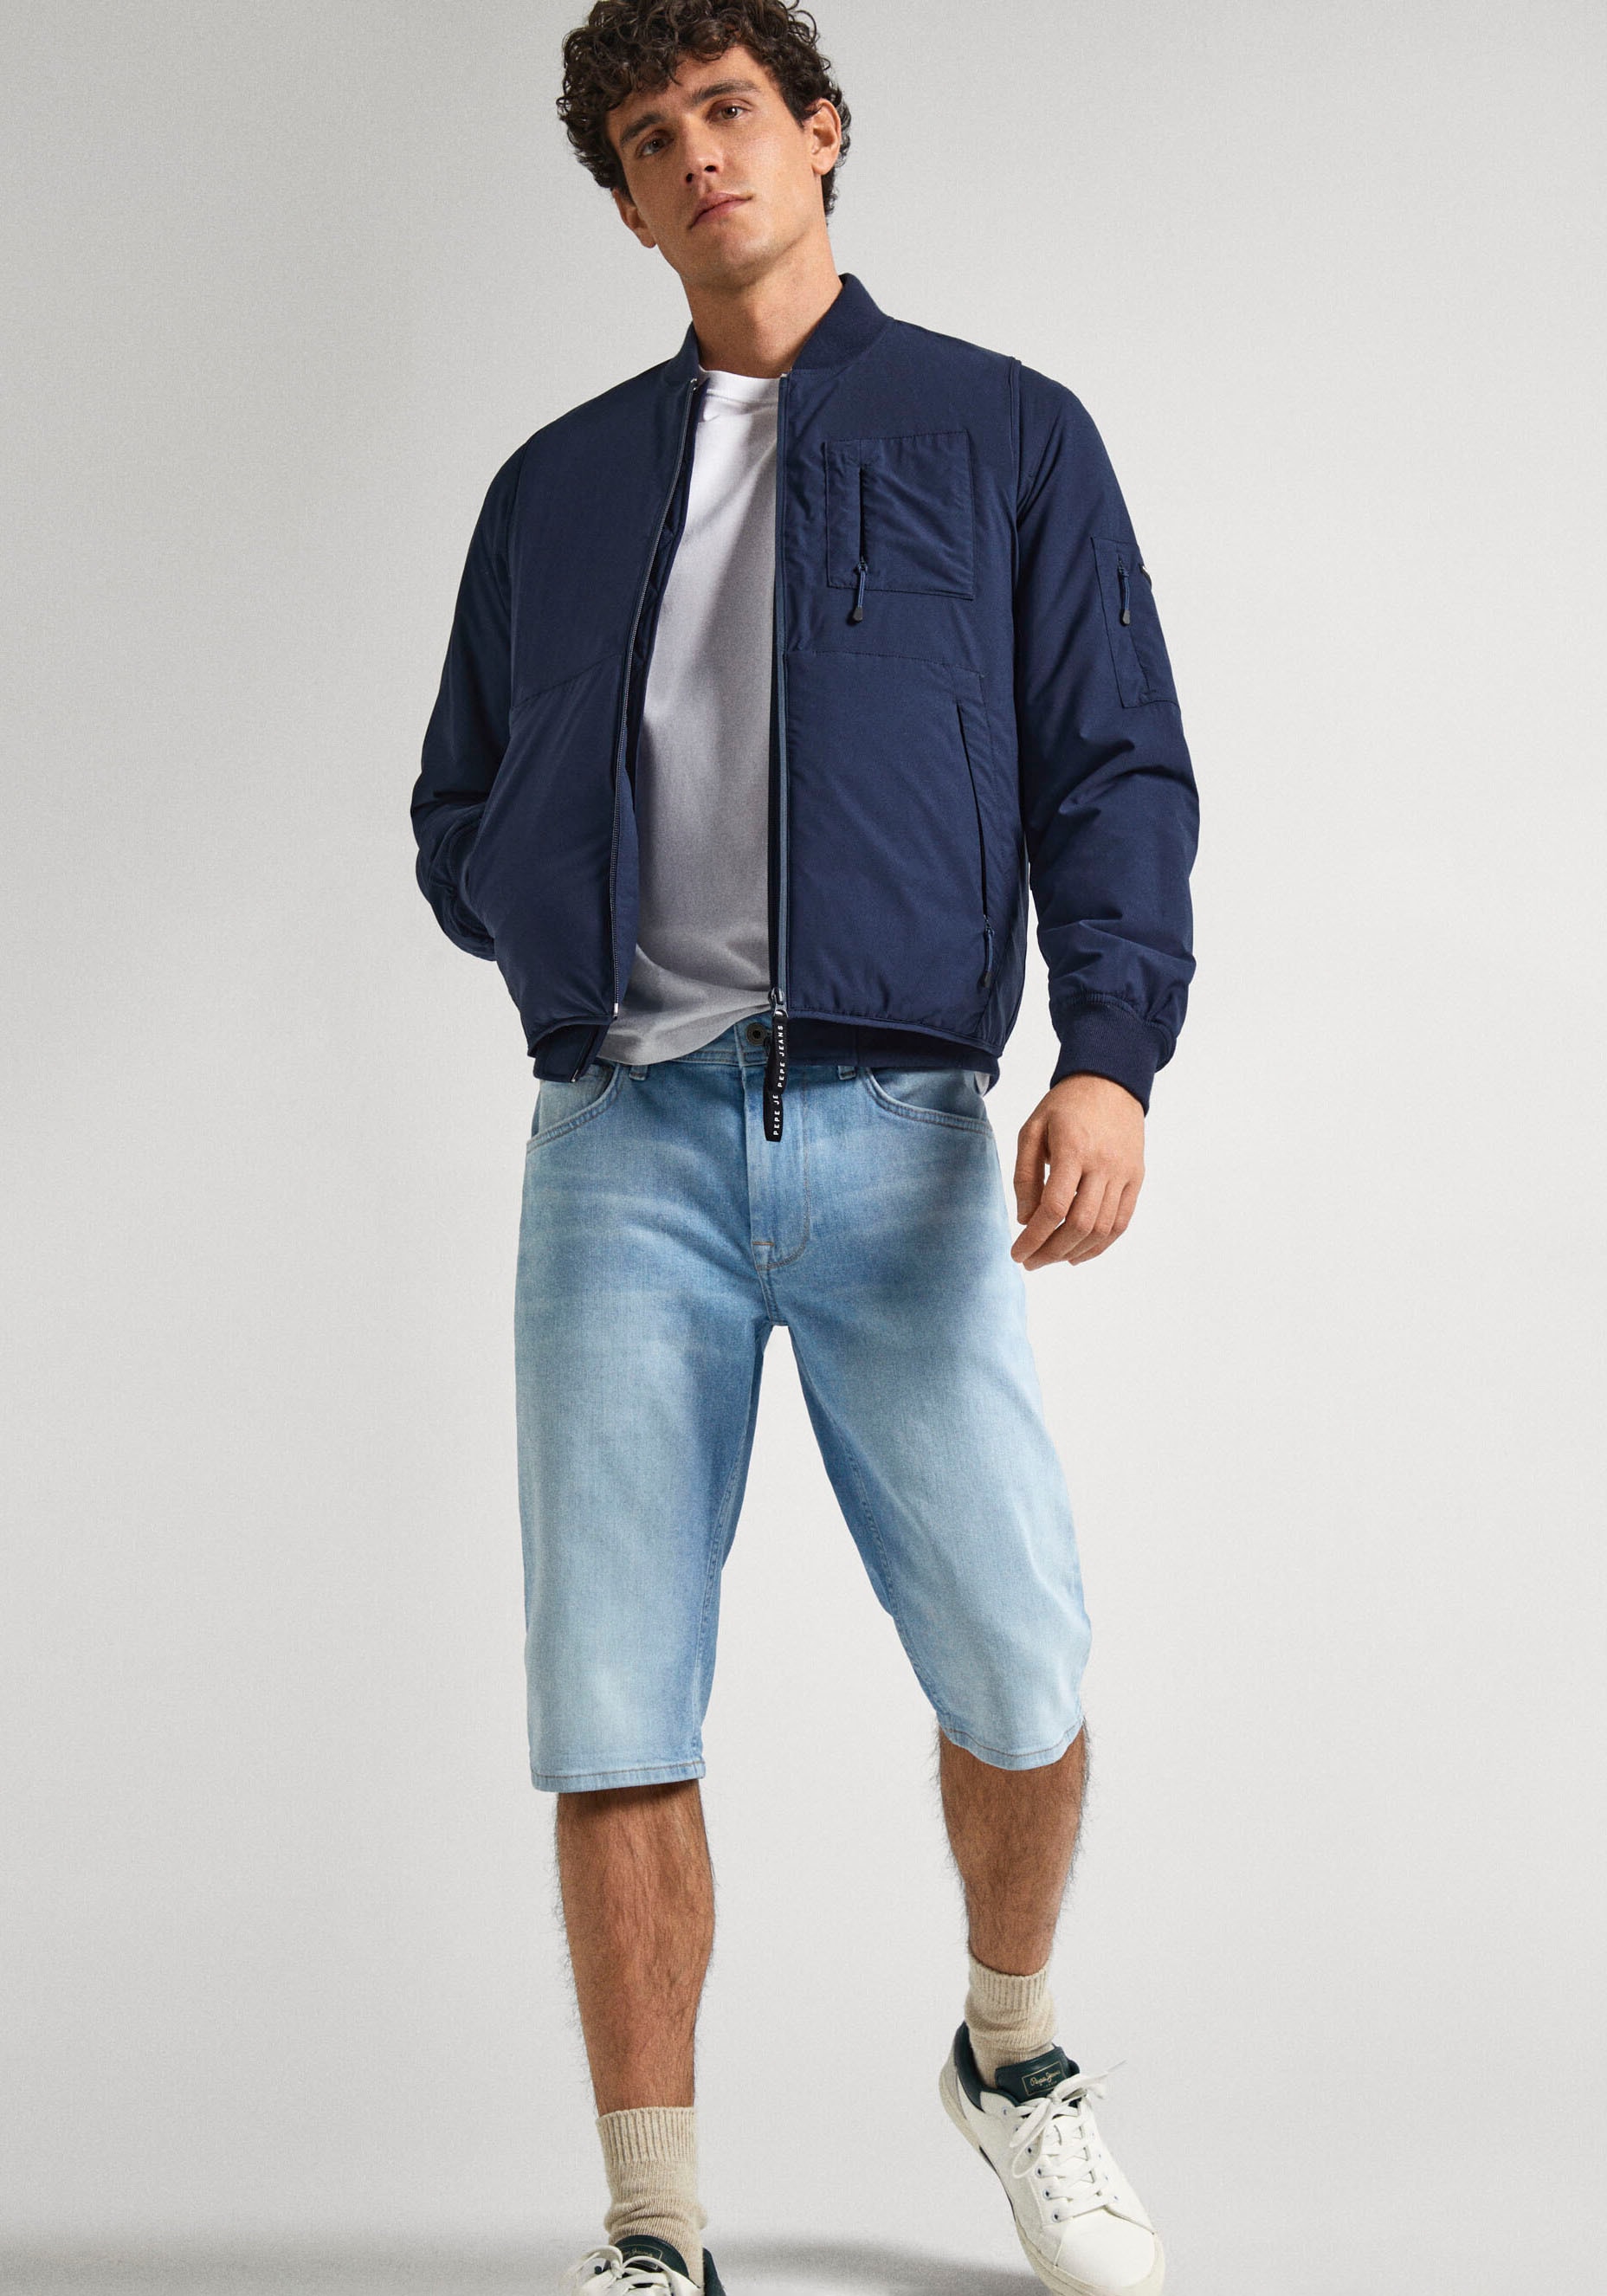 Pepe Jeans Shorts, mit Markenlabel